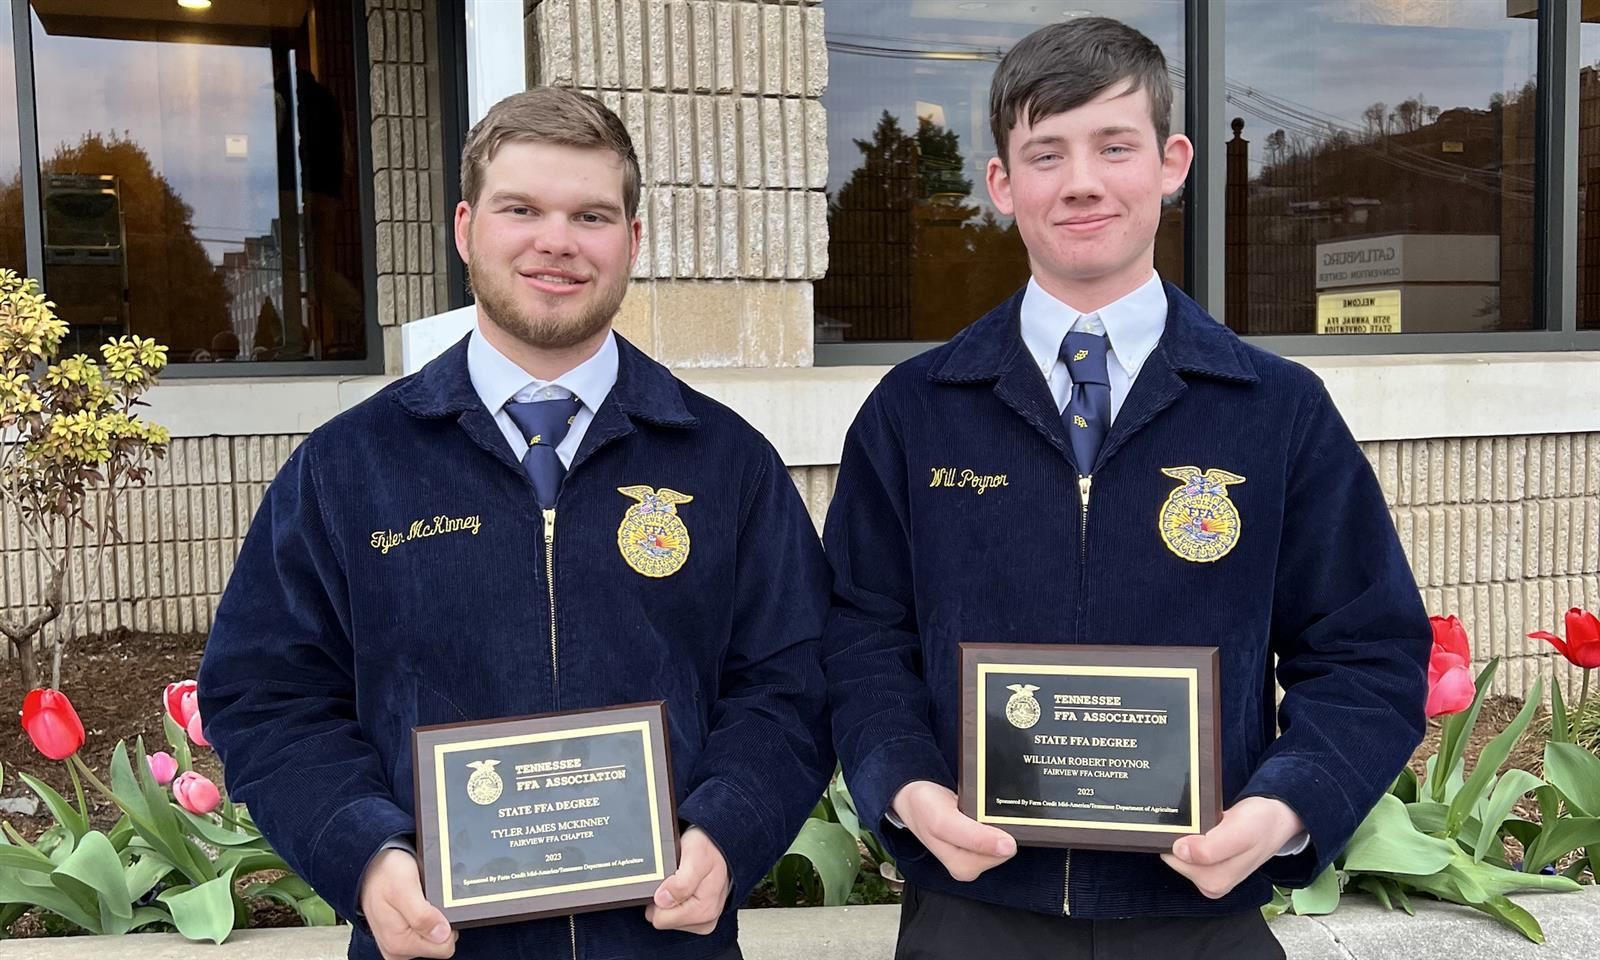 Students from Fairview and Page high schools returned from the Tennessee Future Farmers of America (FFA) State Convention with new awards and degrees under their belts.